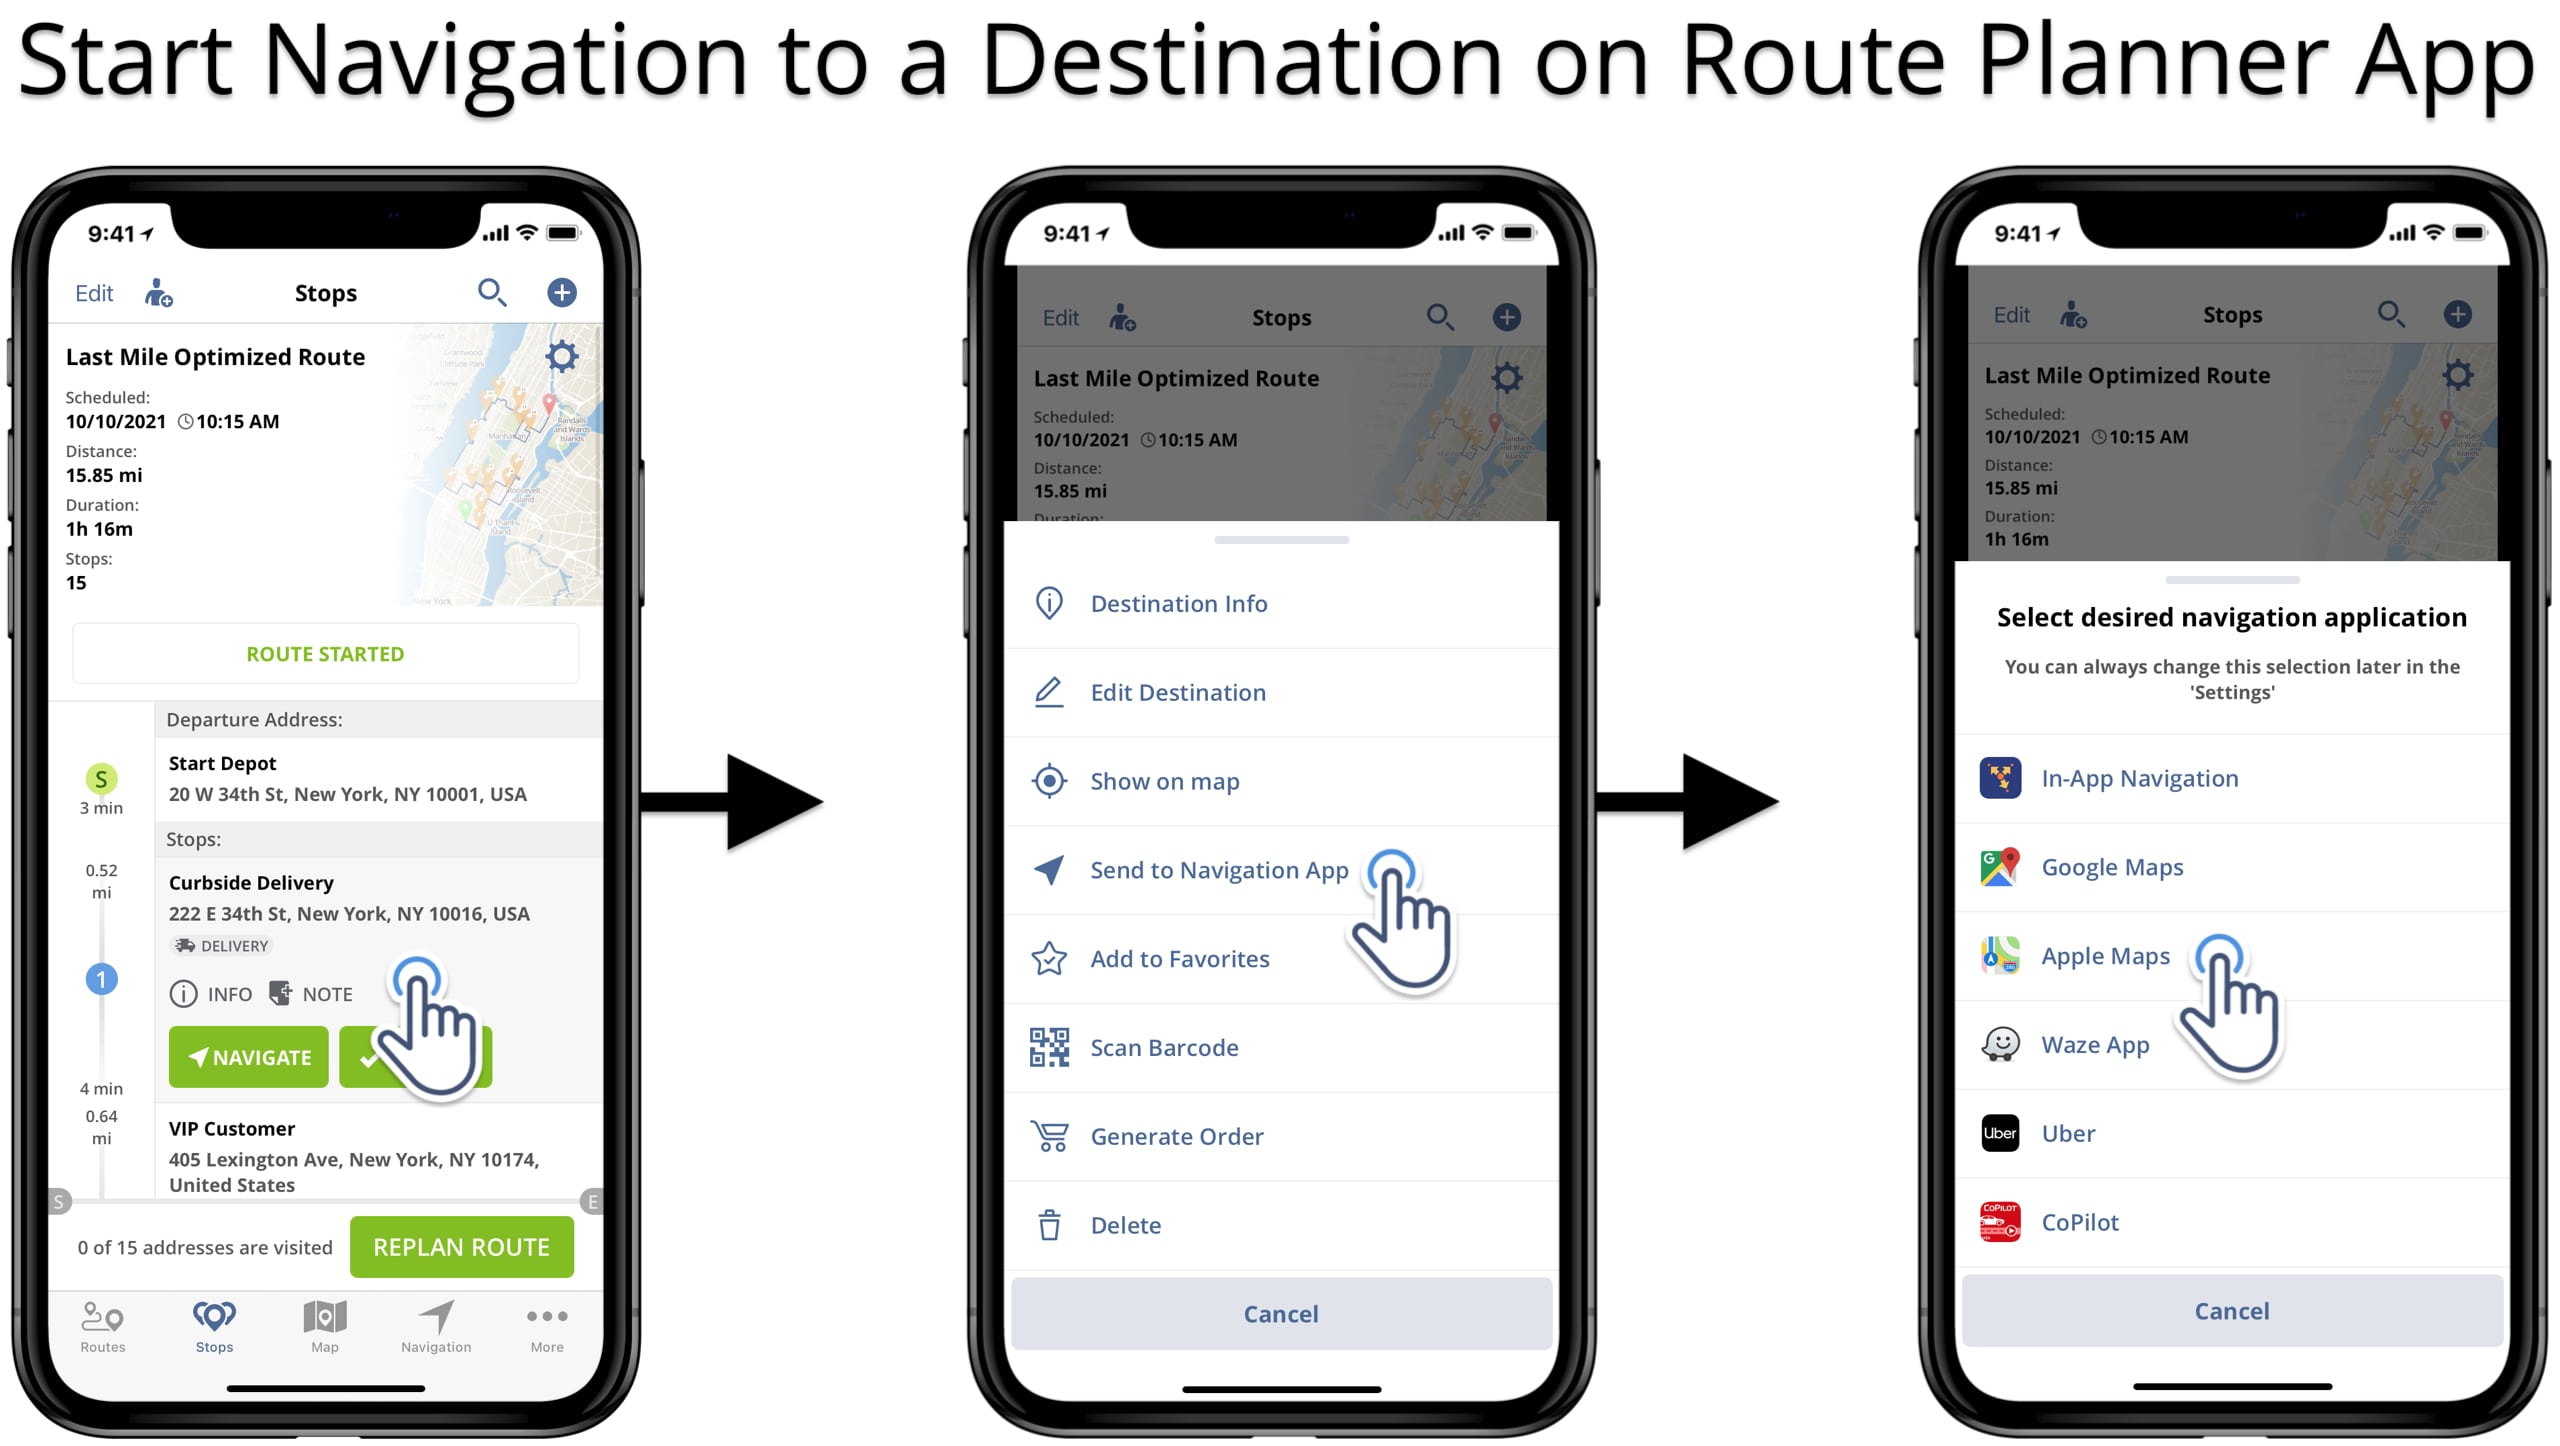 Send route destinations to iPhone navigation apps like Google Maps, Apple Maps, Waze, and more. 